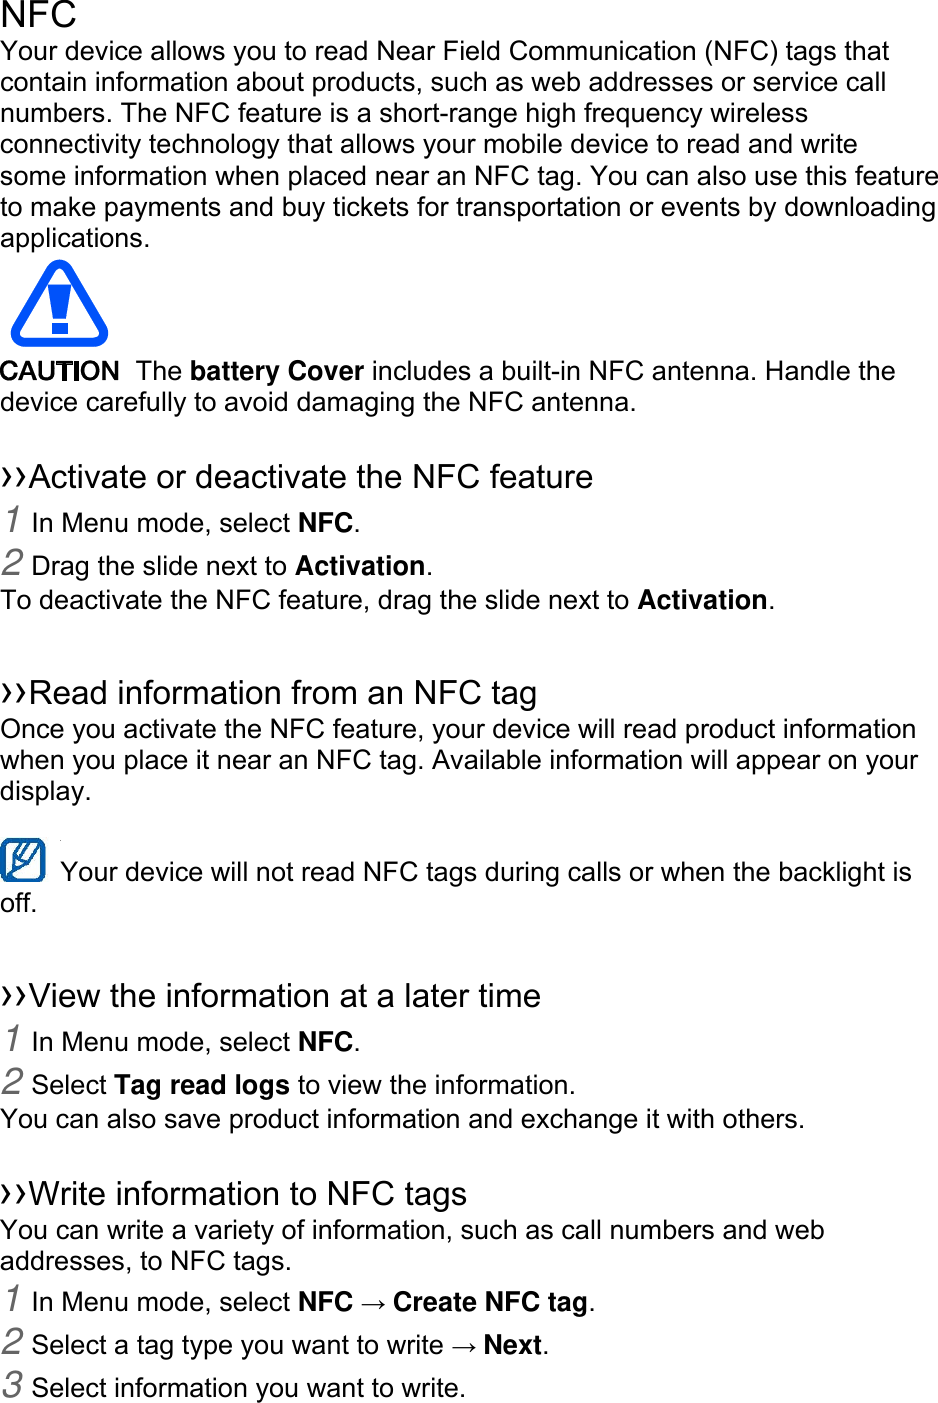 NFC Your device allows you to read Near Field Communication (NFC) tags that contain information about products, such as web addresses or service call numbers. The NFC feature is a short-range high frequency wireless connectivity technology that allows your mobile device to read and write some information when placed near an NFC tag. You can also use this feature to make payments and buy tickets for transportation or events by downloading applications.   The battery Cover includes a built-in NFC antenna. Handle the device carefully to avoid damaging the NFC antenna.  ››Activate or deactivate the NFC feature 1 In Menu mode, select NFC. 2 Drag the slide next to Activation. To deactivate the NFC feature, drag the slide next to Activation.  ››Read information from an NFC tag Once you activate the NFC feature, your device will read product information when you place it near an NFC tag. Available information will appear on your display.  Your device will not read NFC tags during calls or when the backlight is   off.  ››View the information at a later time 1 In Menu mode, select NFC. 2 Select Tag read logs to view the information. You can also save product information and exchange it with others.  ››Write information to NFC tags   You can write a variety of information, such as call numbers and web addresses, to NFC tags. 1 In Menu mode, select NFC → Create NFC tag. 2 Select a tag type you want to write → Next. 3 Select information you want to write. 